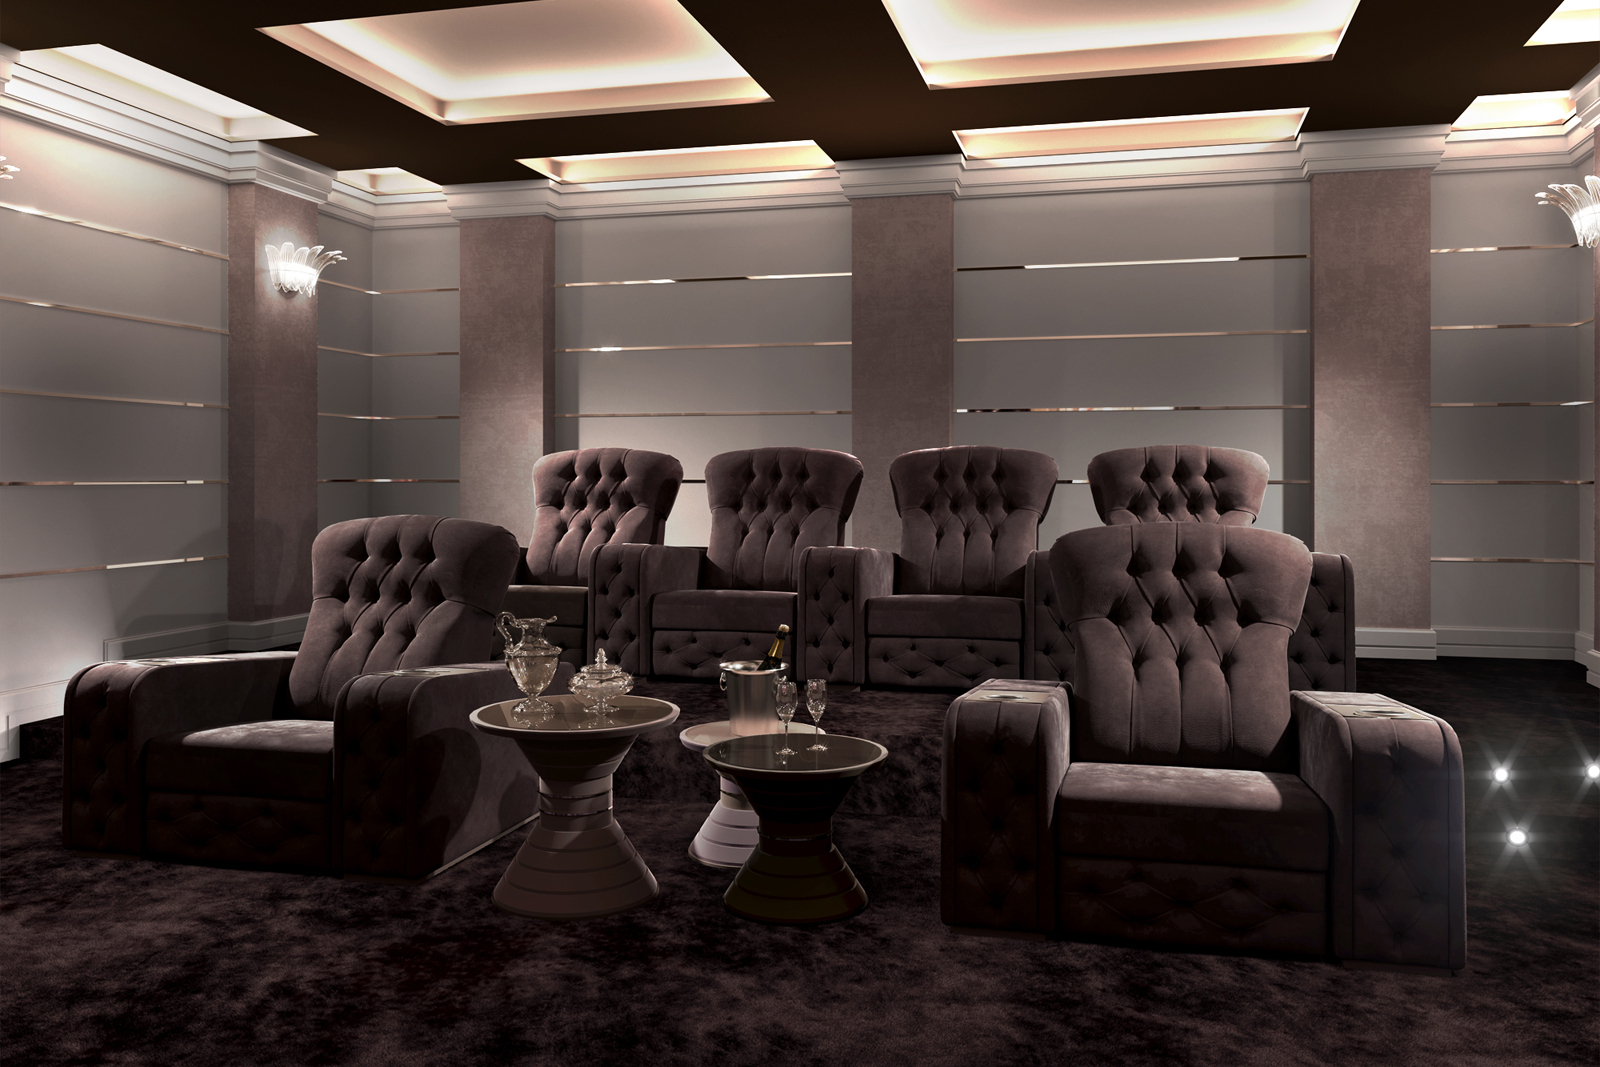 Bespoke cinema room with luxury recliner seating made in Italy